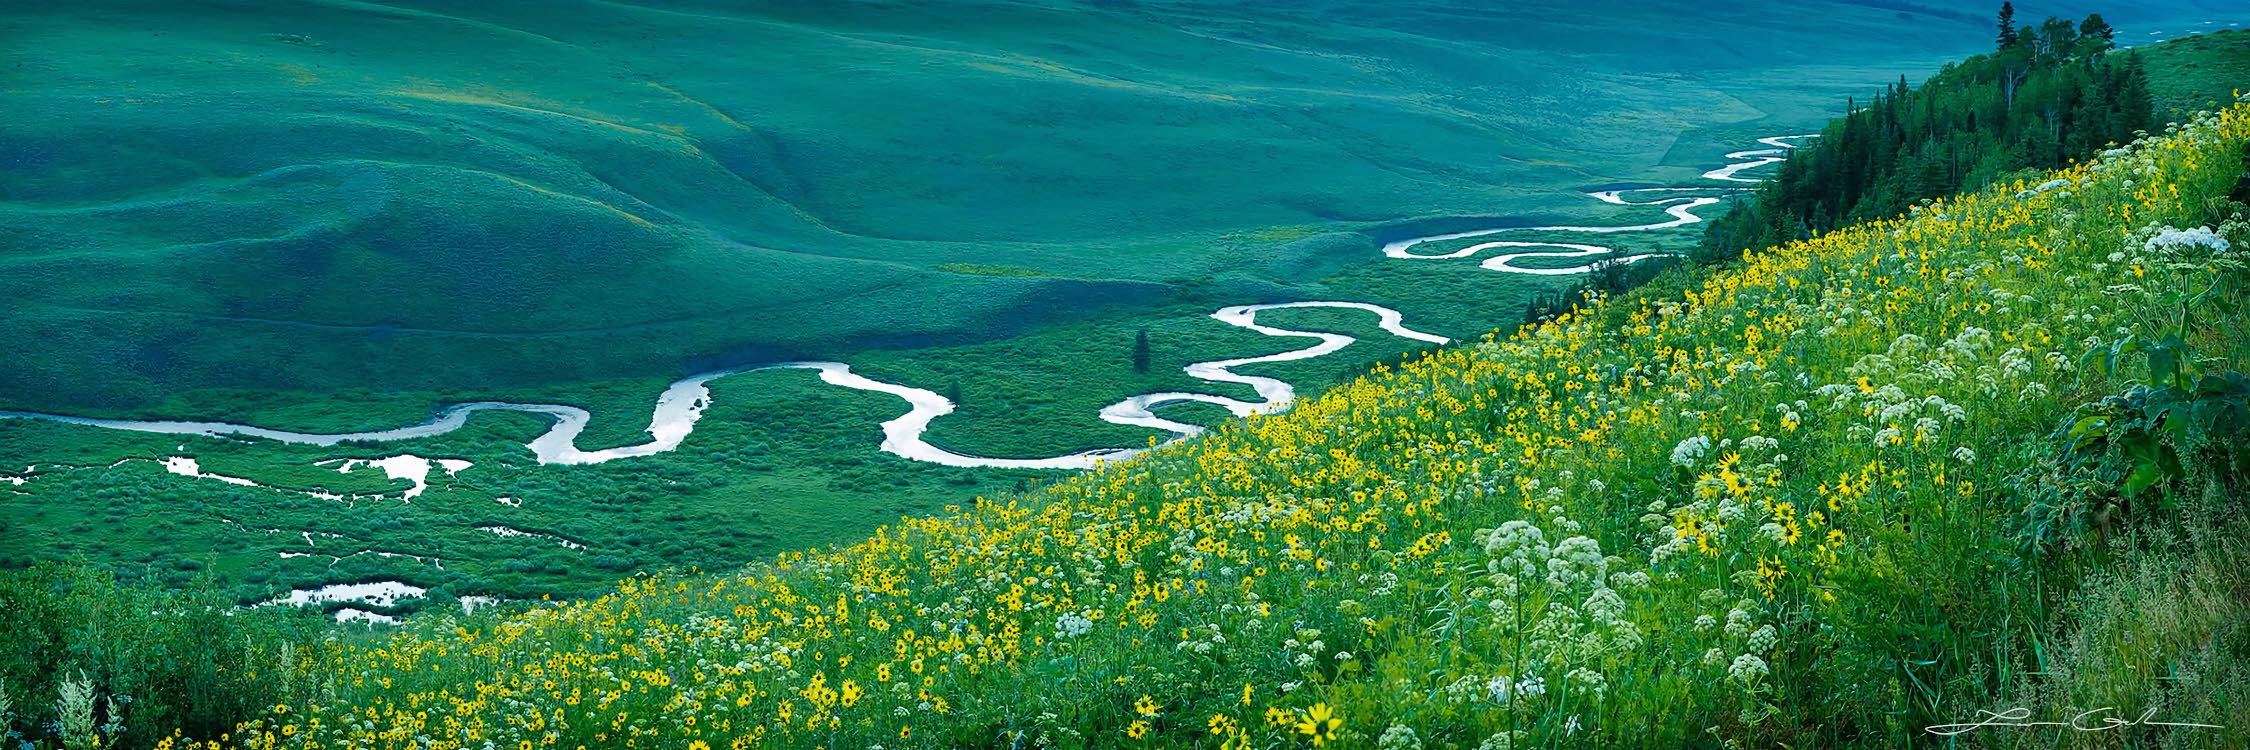 A meandering river in a green mountain valley and a field of wildflowers, Crested Butte, Colorado